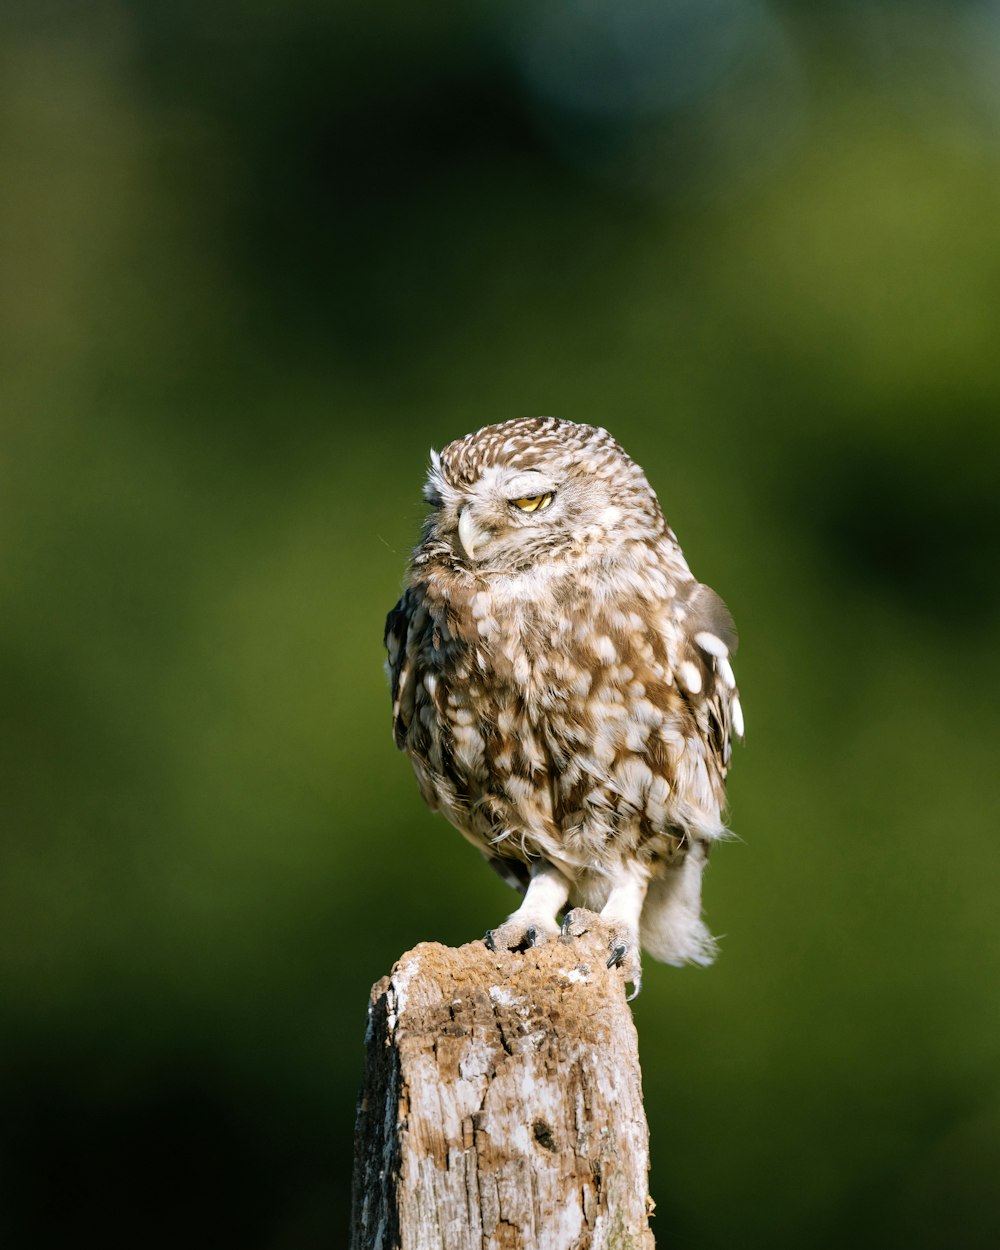 a small owl sitting on top of a wooden post